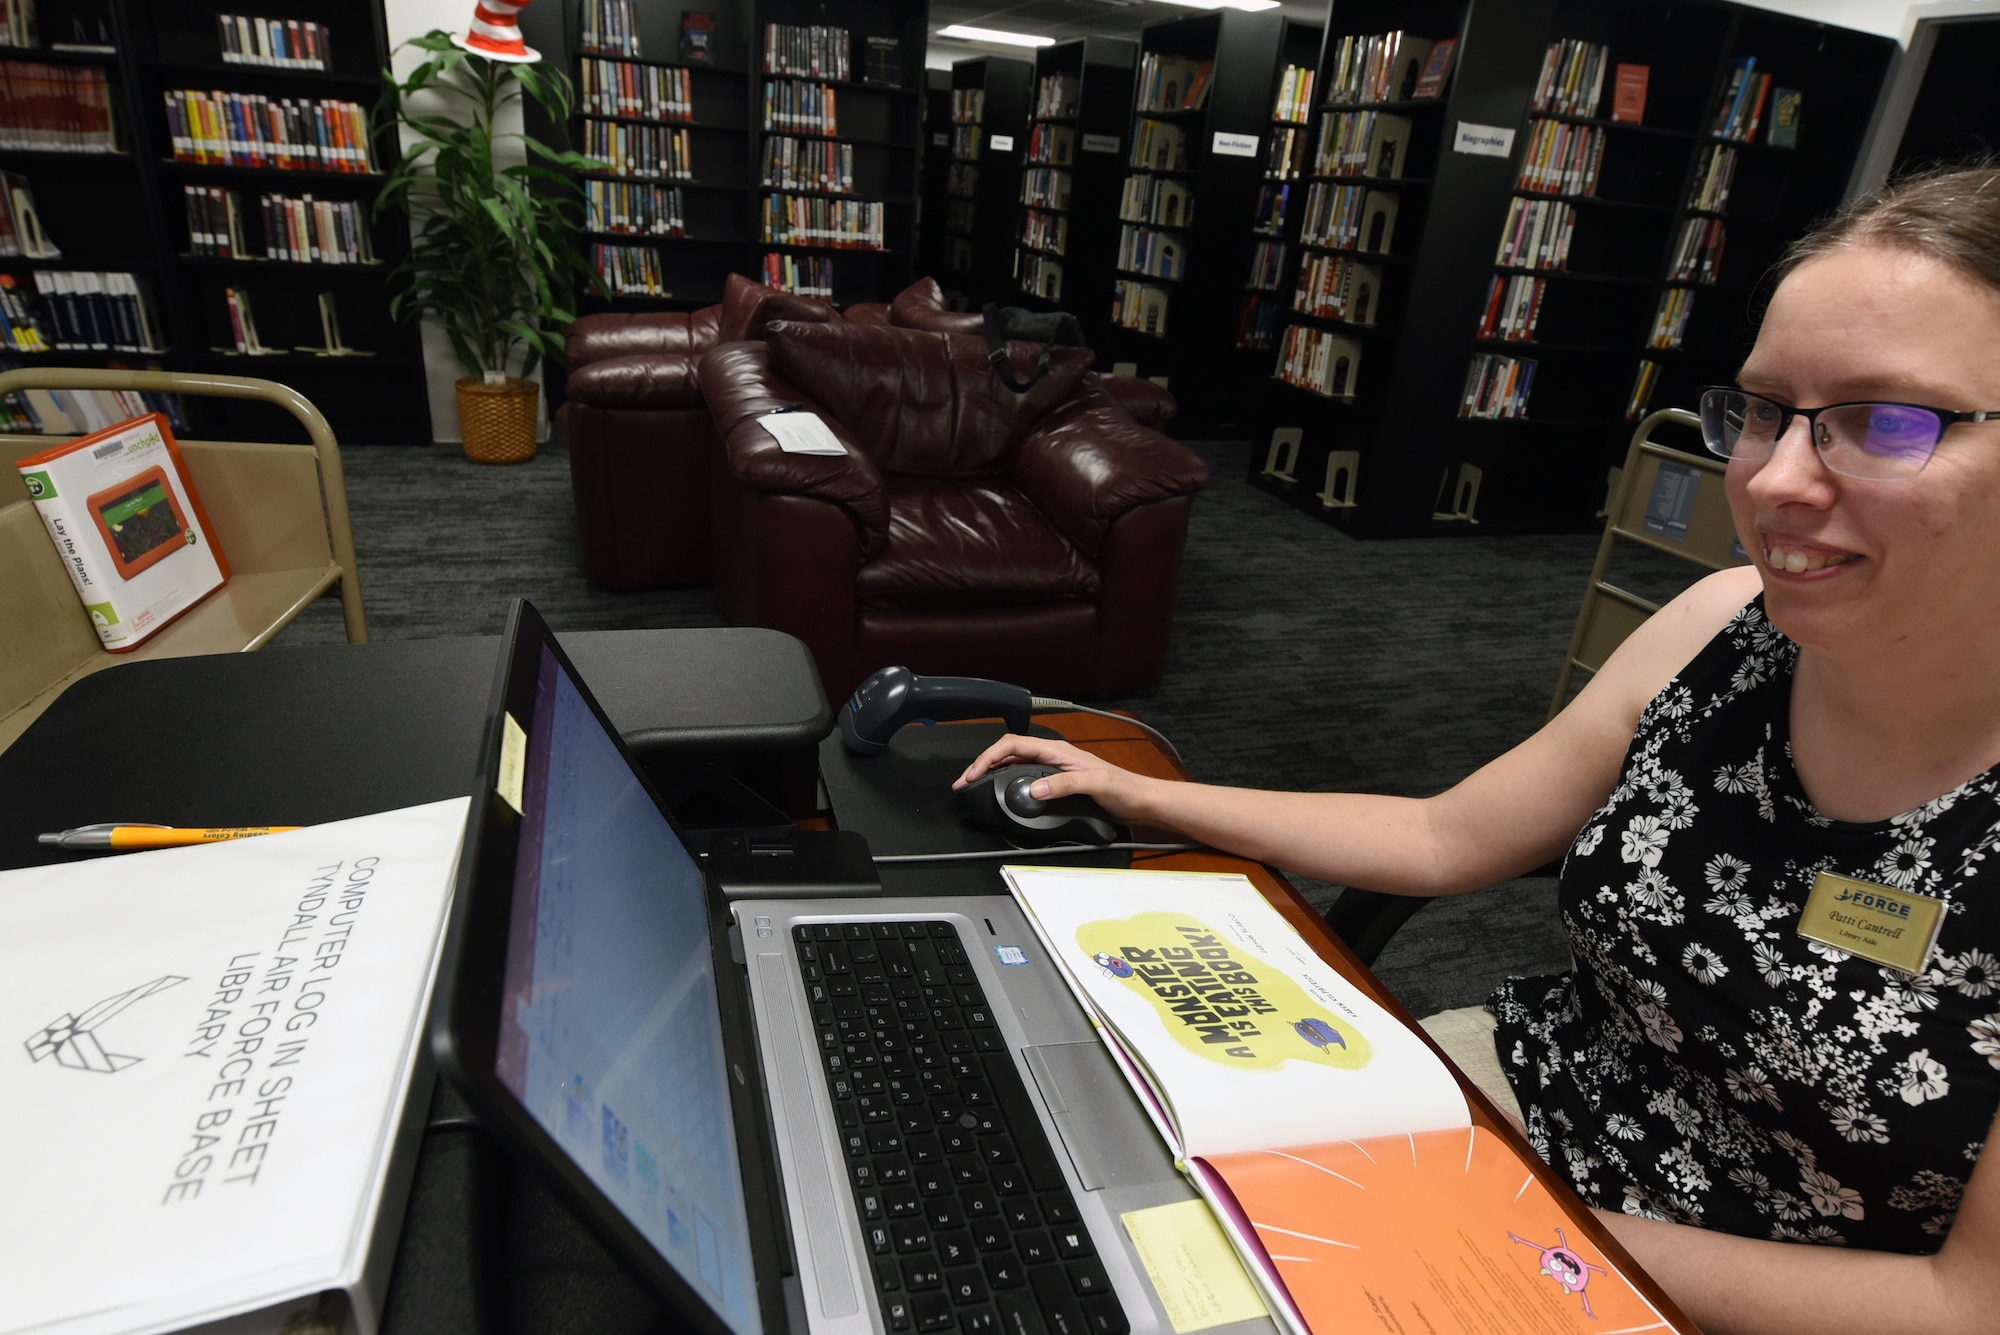 Library staff member works on computer